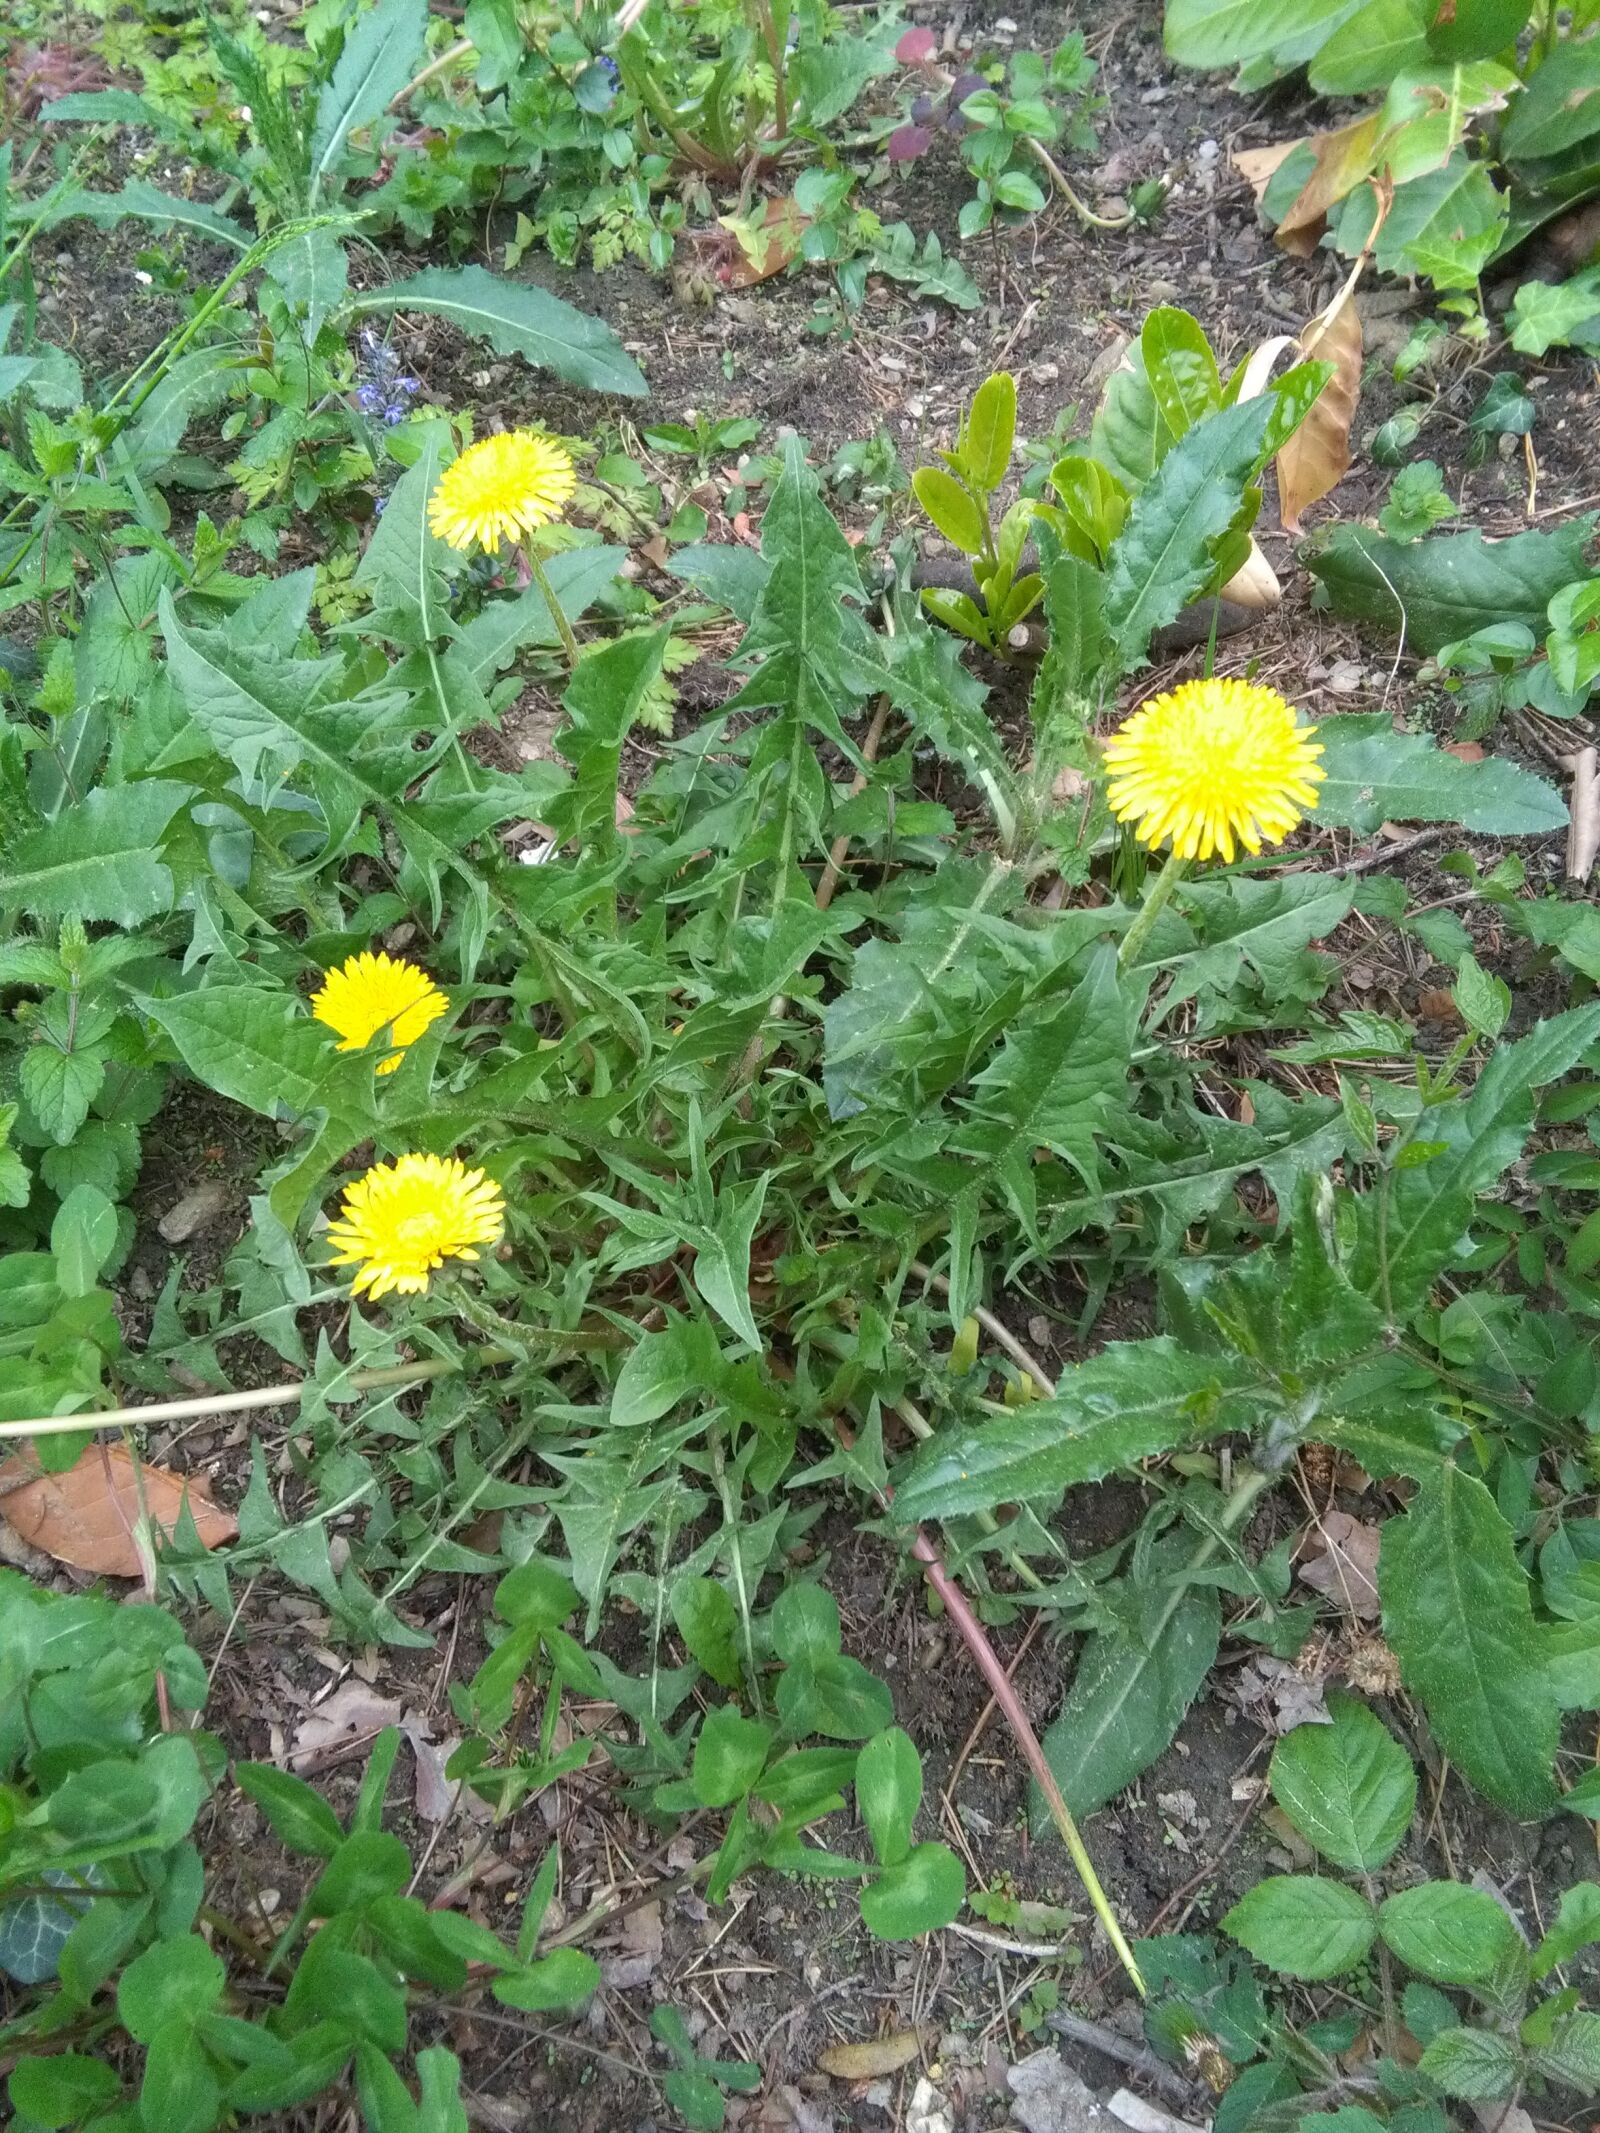 HUAWEI Y6 sample photo. Dandelion, plant, nature photography